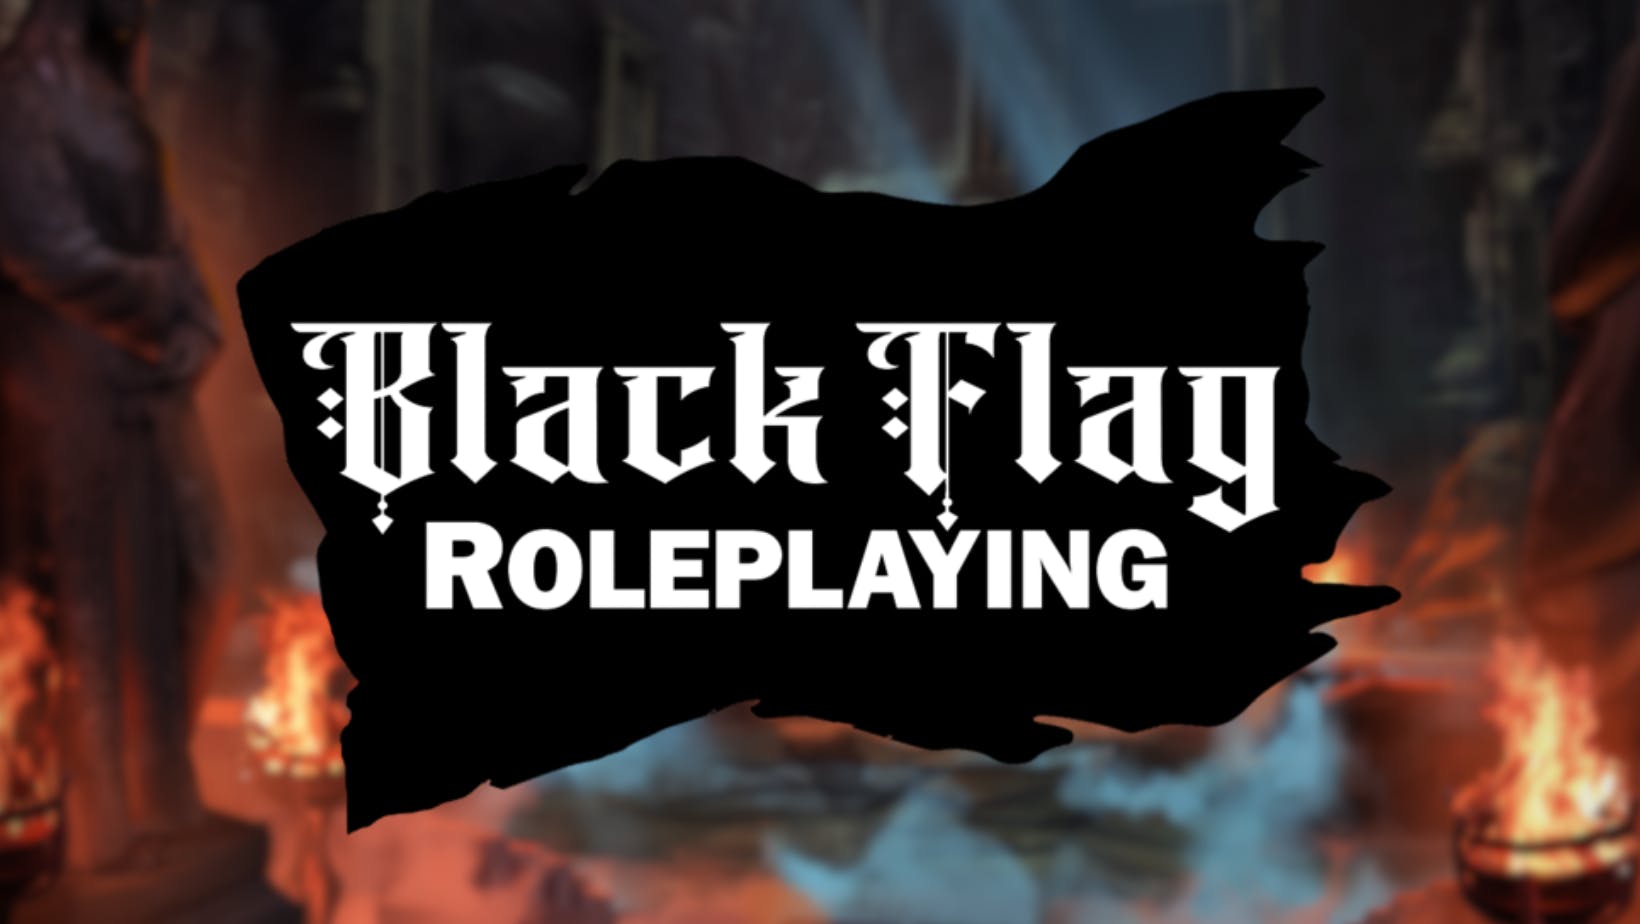 Black Flag Roleplaying Compatibility